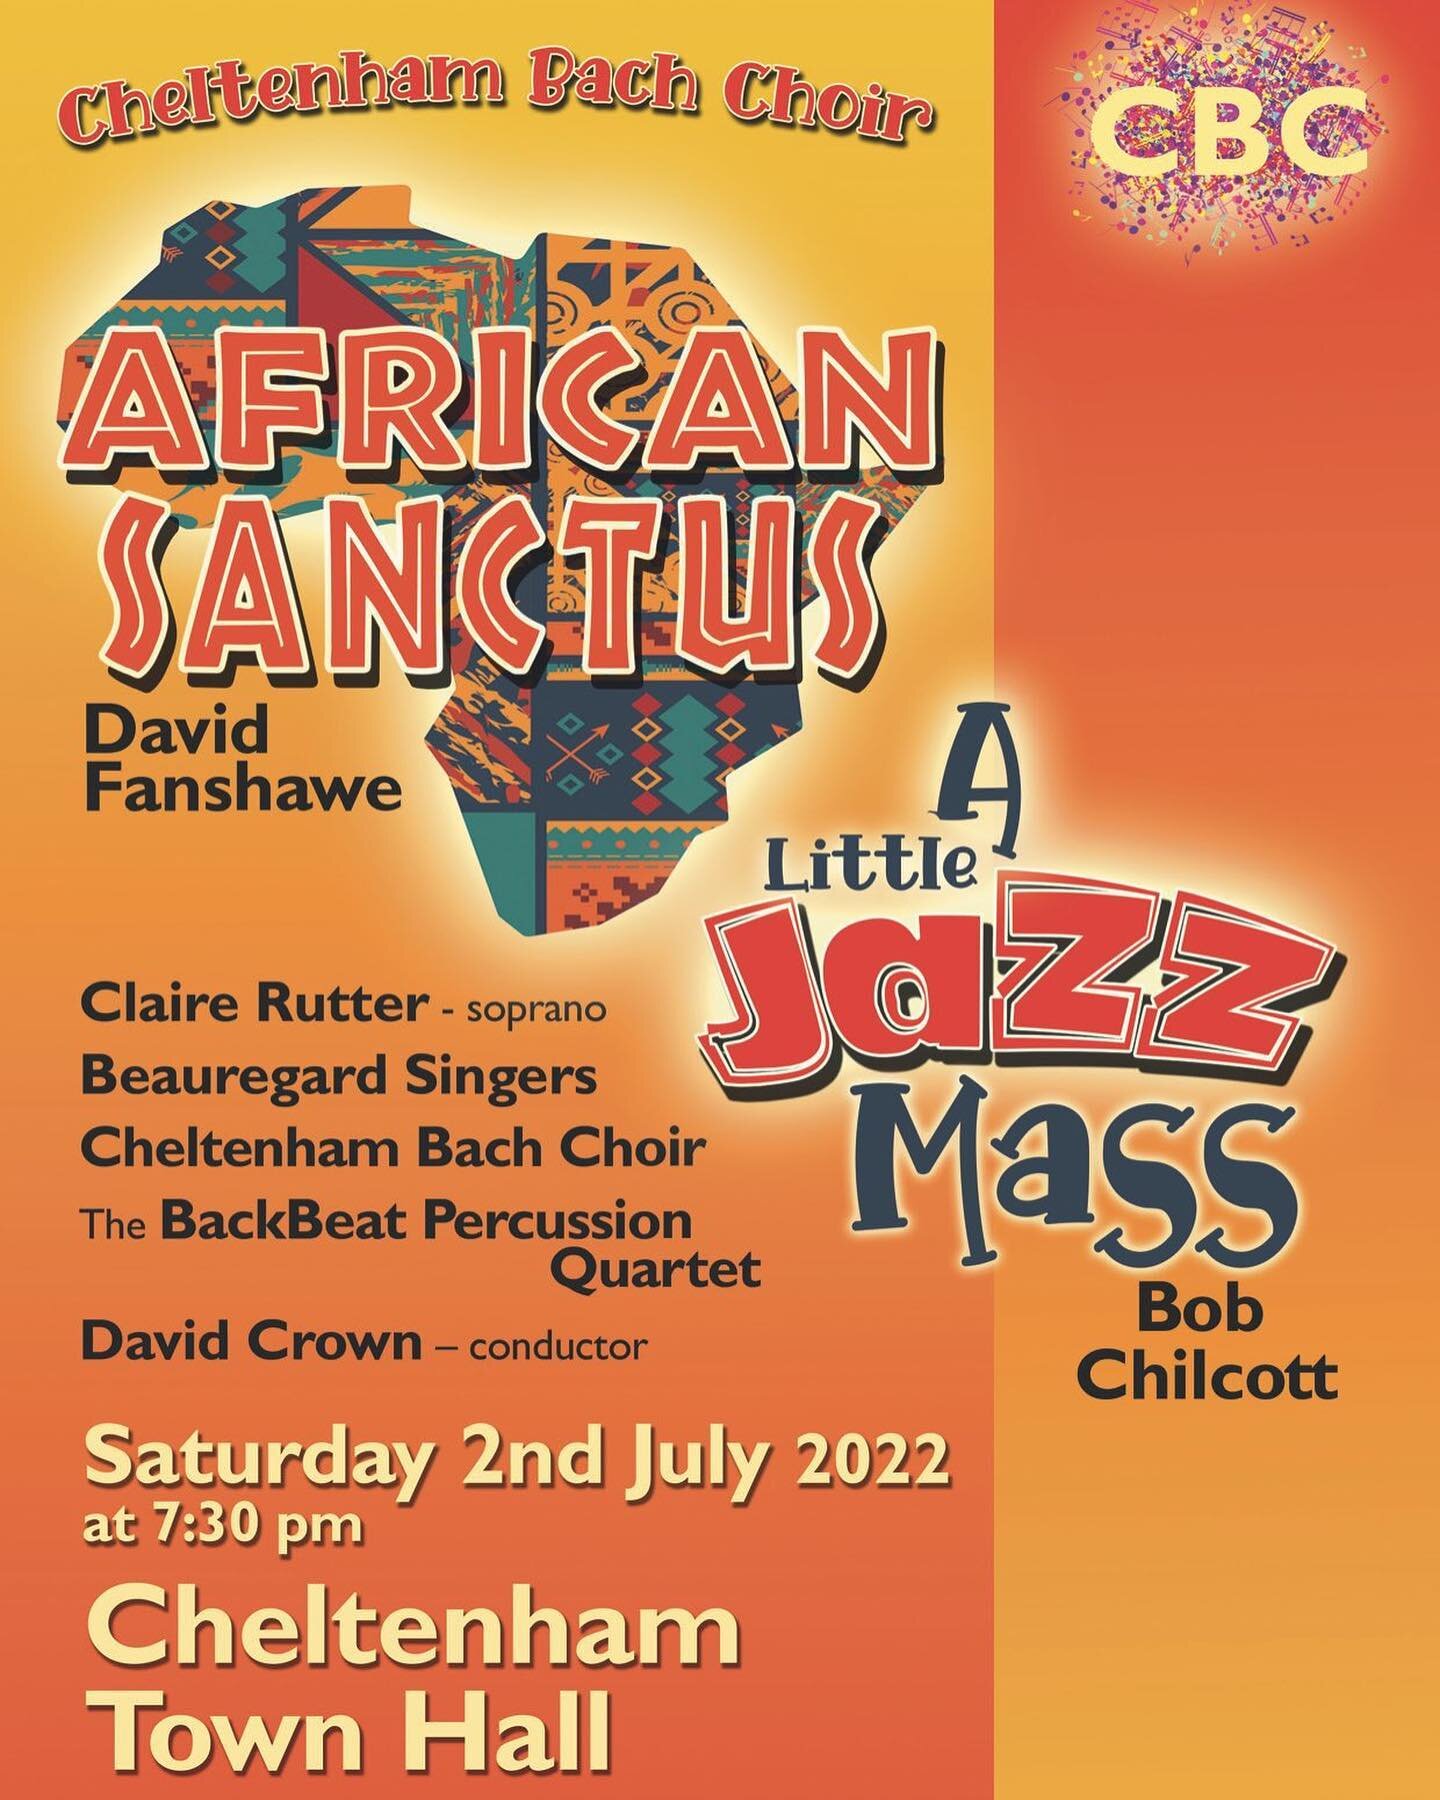 We are excited for this upcoming concert of African Sanctus featuring @cheltbachchoir with @bob.chilcott piece A Little Jazz Mass at @cheltenhamtownhall on Saturday 2nd July. Jane Fanshawe and her daughter @rachelfanshawe will be doing a pre-talk bef